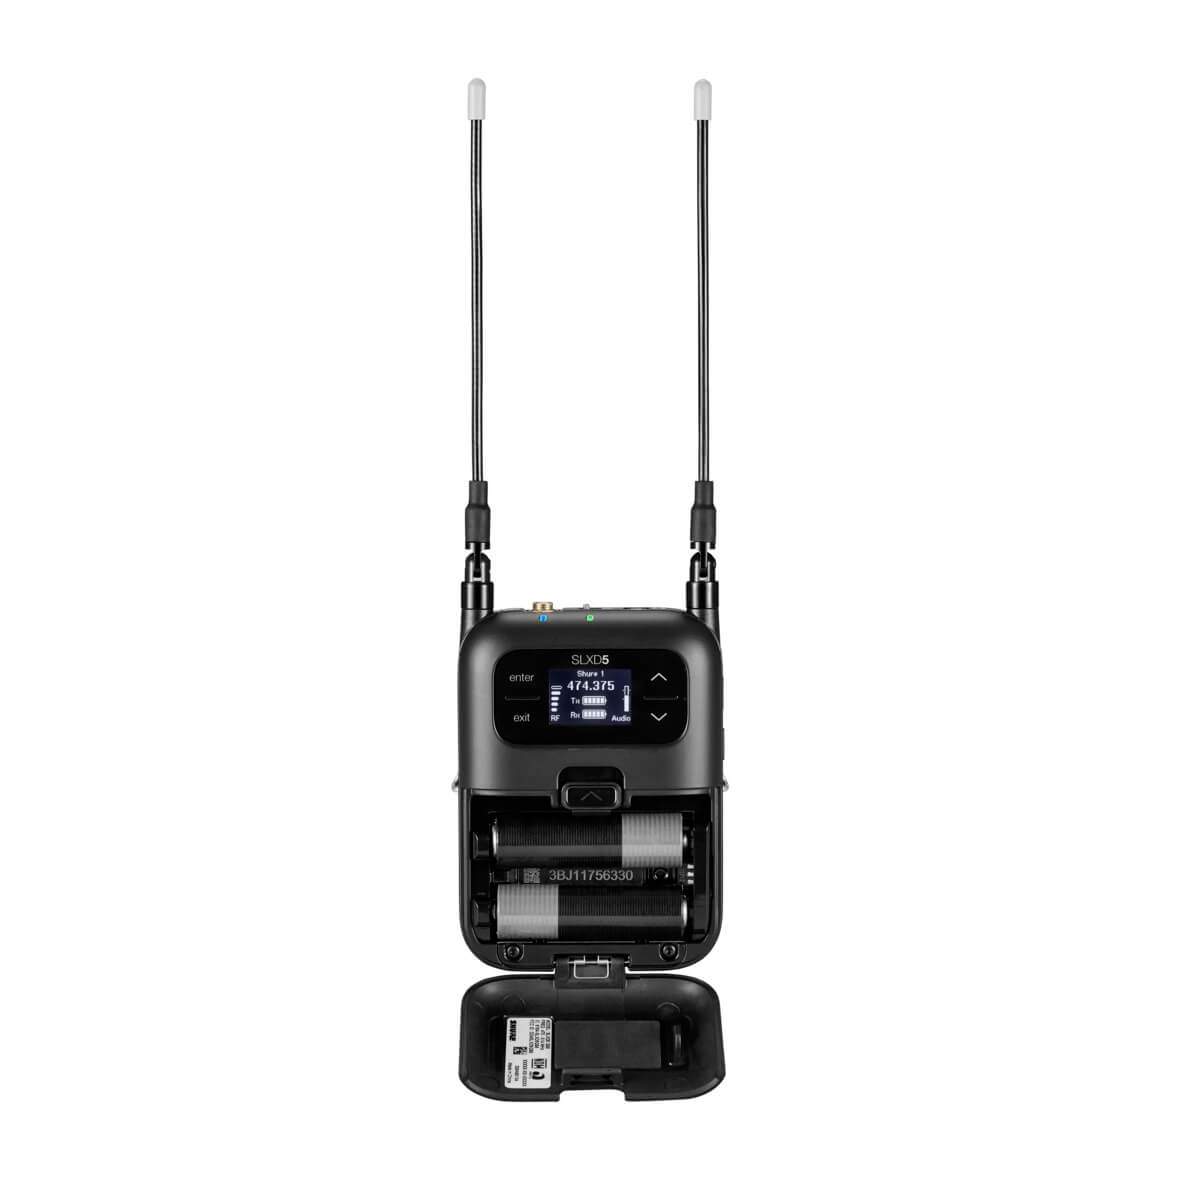 Shure SLXD5 - Single-Channel Portable Digital Wireless Receiver, shown with AA batteries